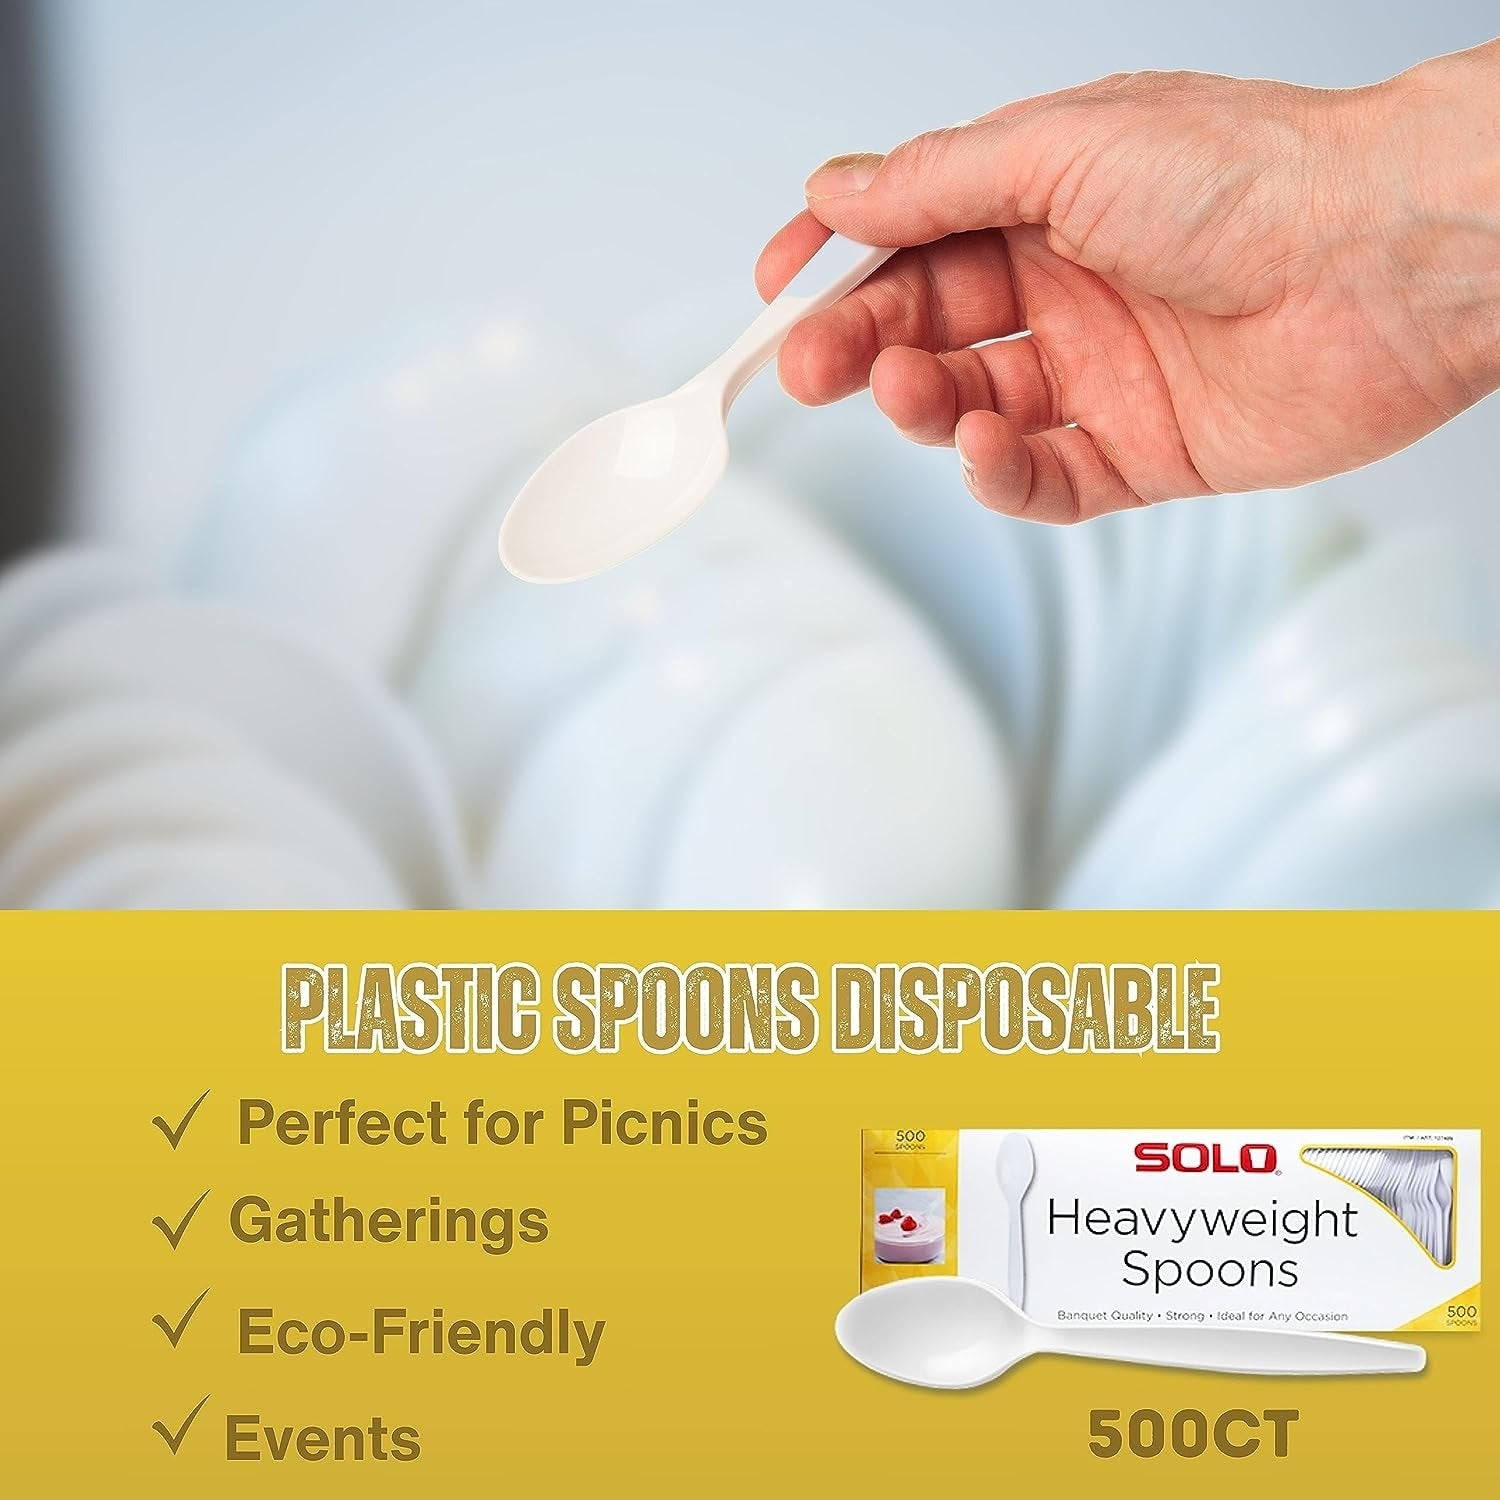 Worldwide Nutrition Bundle 2 Items - SOLO Heavy Duty Plastic Spoons and Disposable Spoons Plastic Cutlery White Colored Plastic Spoons Bulk of 500 Count 6 Inch Spoons with Multi-Purpose Keychain